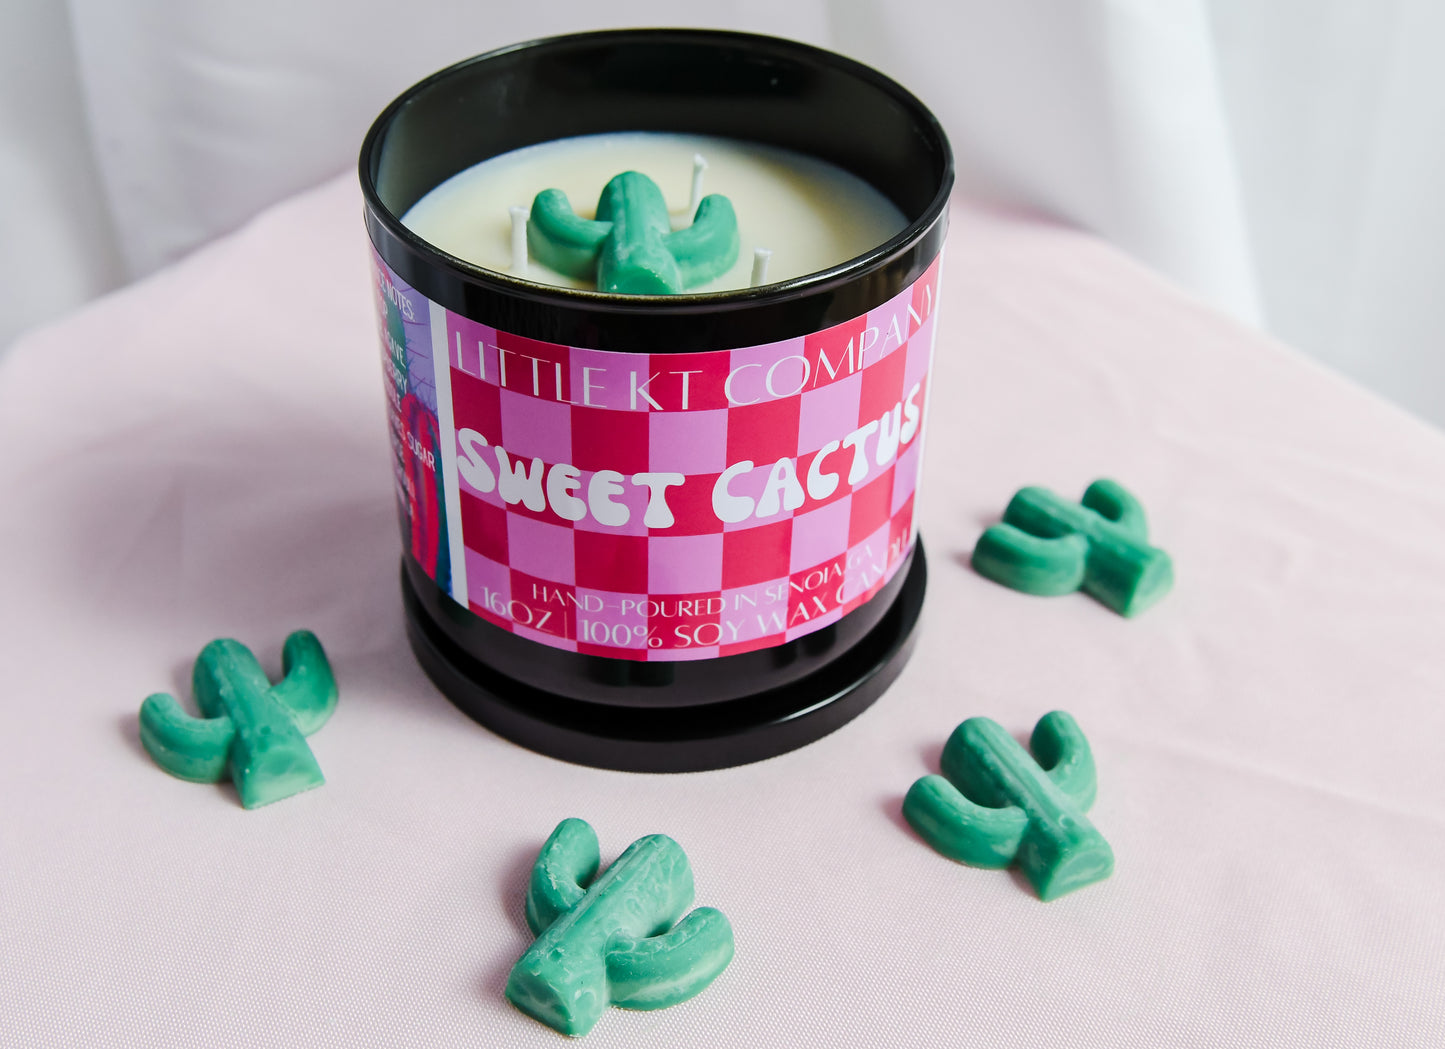 Sweet Cactus Candle